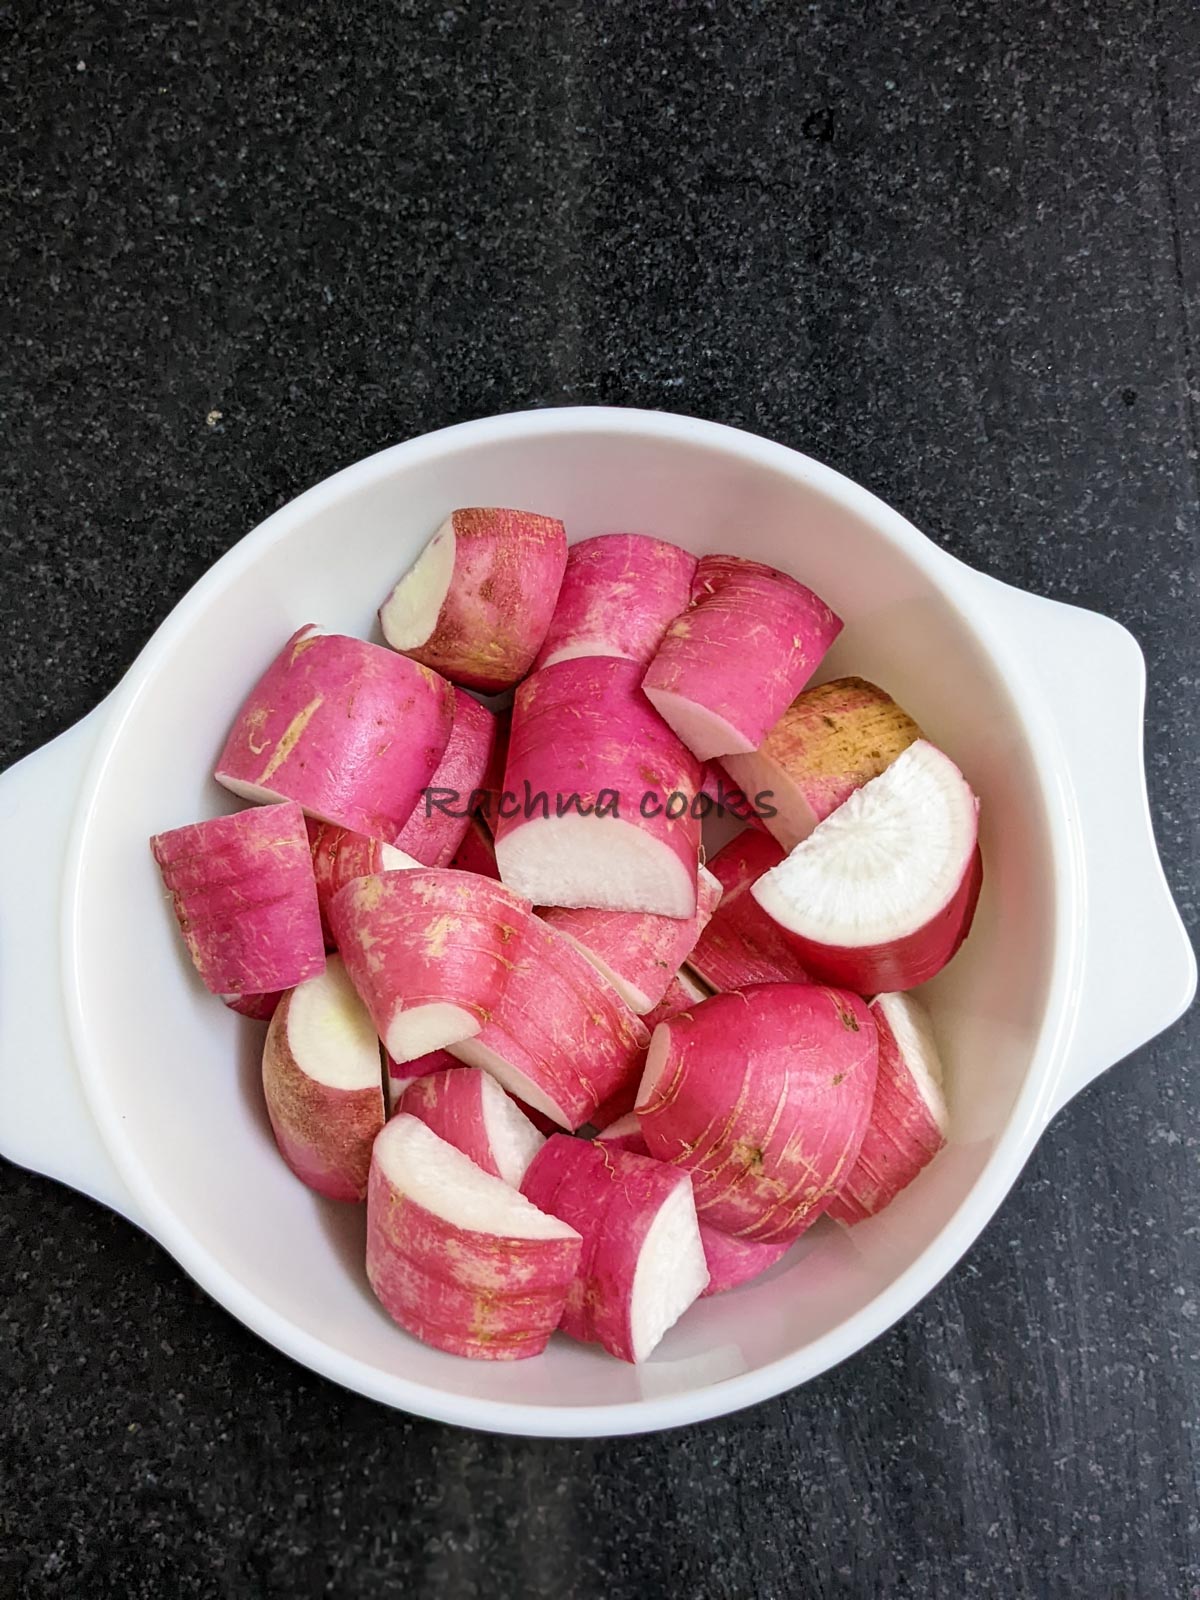 Washed and cut radishes into similar sized pieces